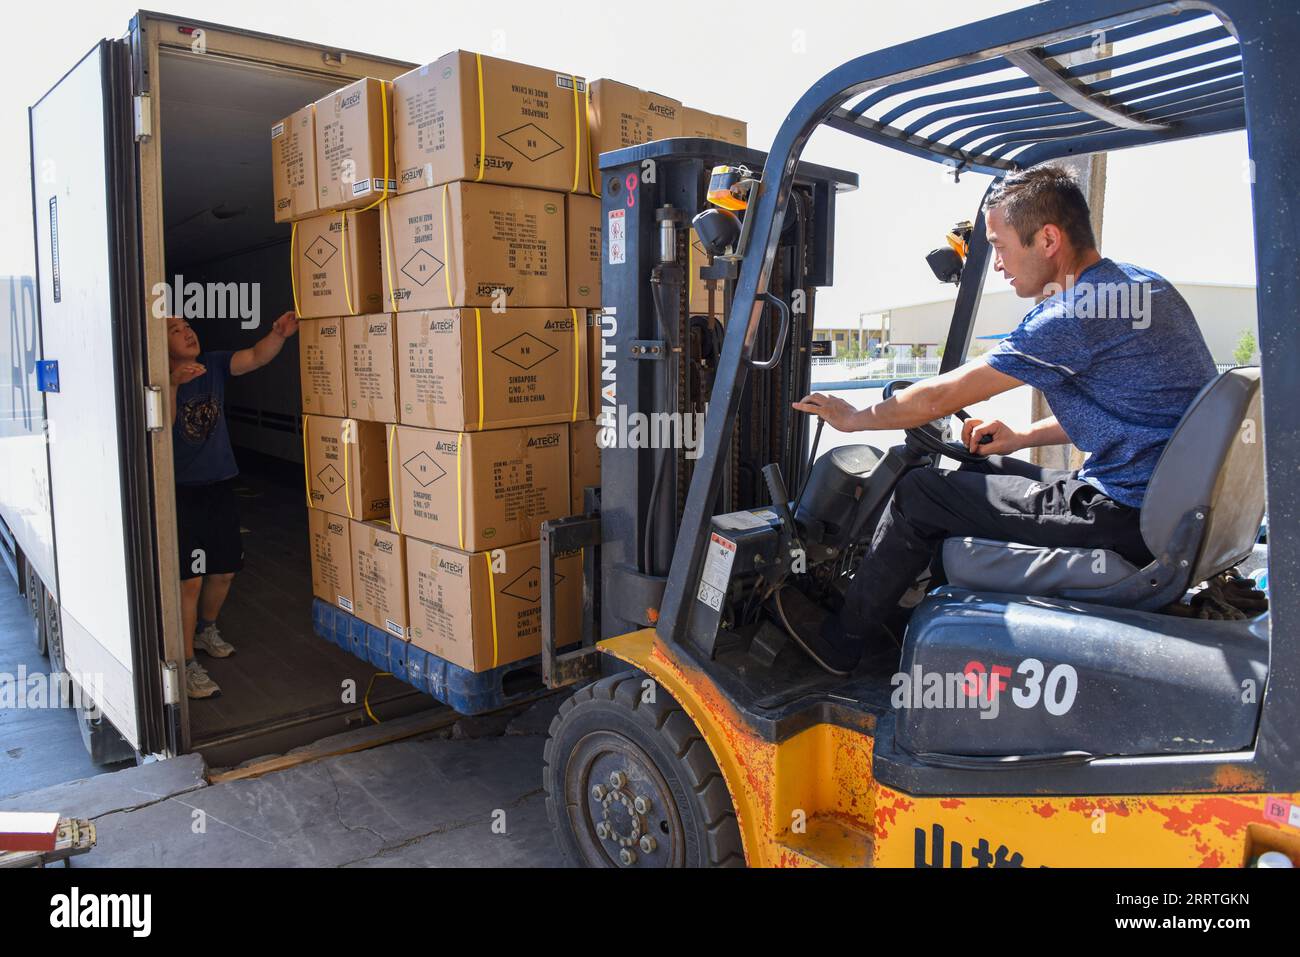 230725 -- ALATAW PASS, July 25, 2023 -- Staff members load cargo onto a truck at the custom clearance center for the cross-border e-commerce of the Alataw Pass comprehensive bonded area in northwest China s Xinjiang Uygur Autonomous Region, July 24, 2023. In recent years, various measures have been taken to create a better business environment for cross-border e-commerce enterprises in Alataw Pass. The cross-border e-commerce business was launched in the inland port in northwest China s Xinjiang Uygur Autonomous Region in January 2020. In the first half of this year, more than 14.50 million cr Stock Photo